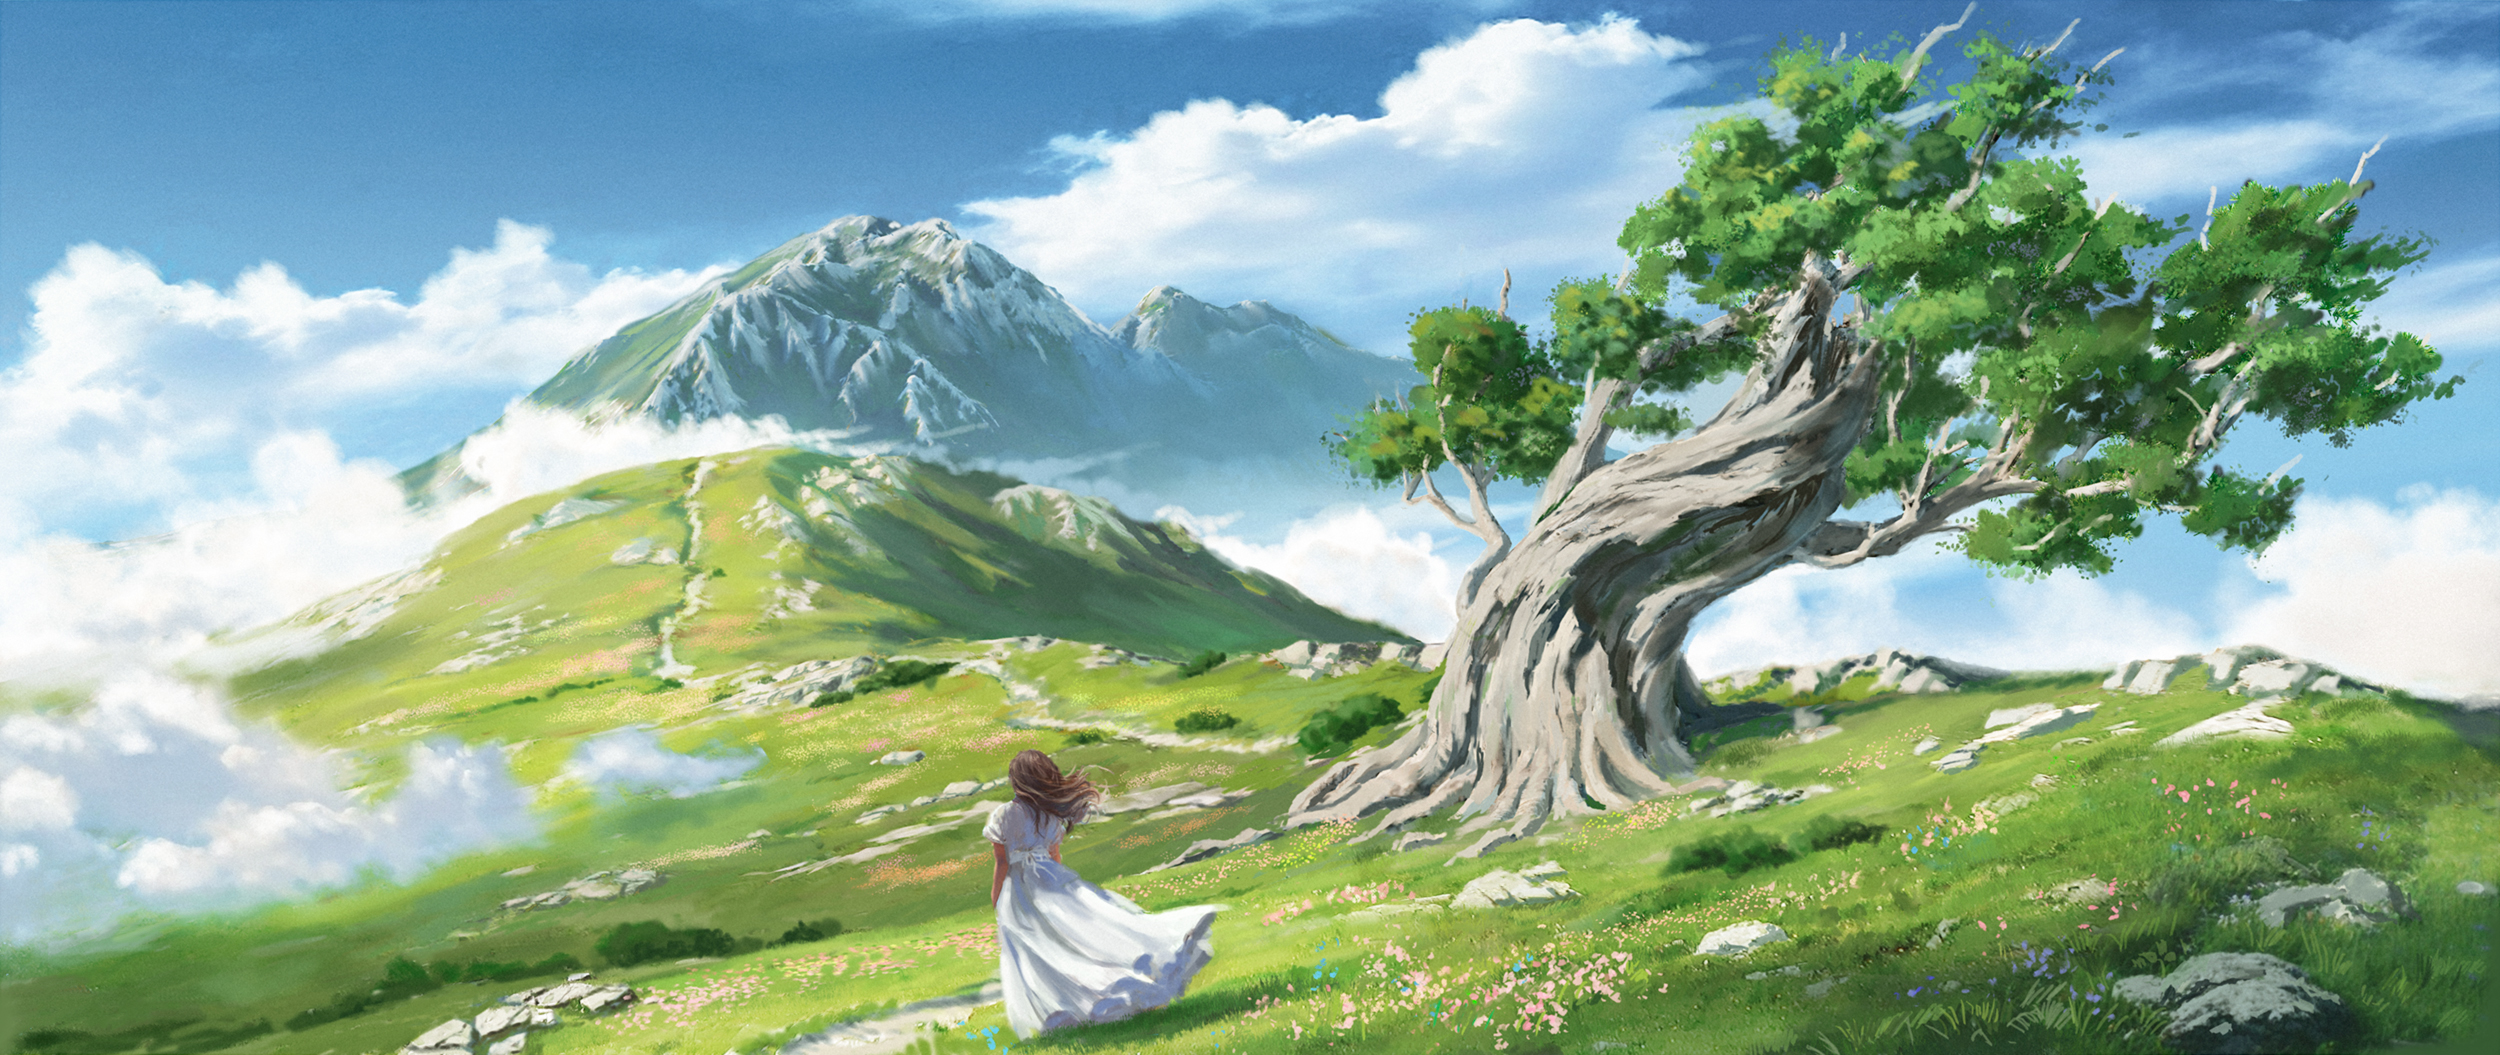 Mountains White Dress Nature Dress Grass Trees Clouds Sky Hair Blowing In The Wind Flowers Rocks Pat 2500x1055